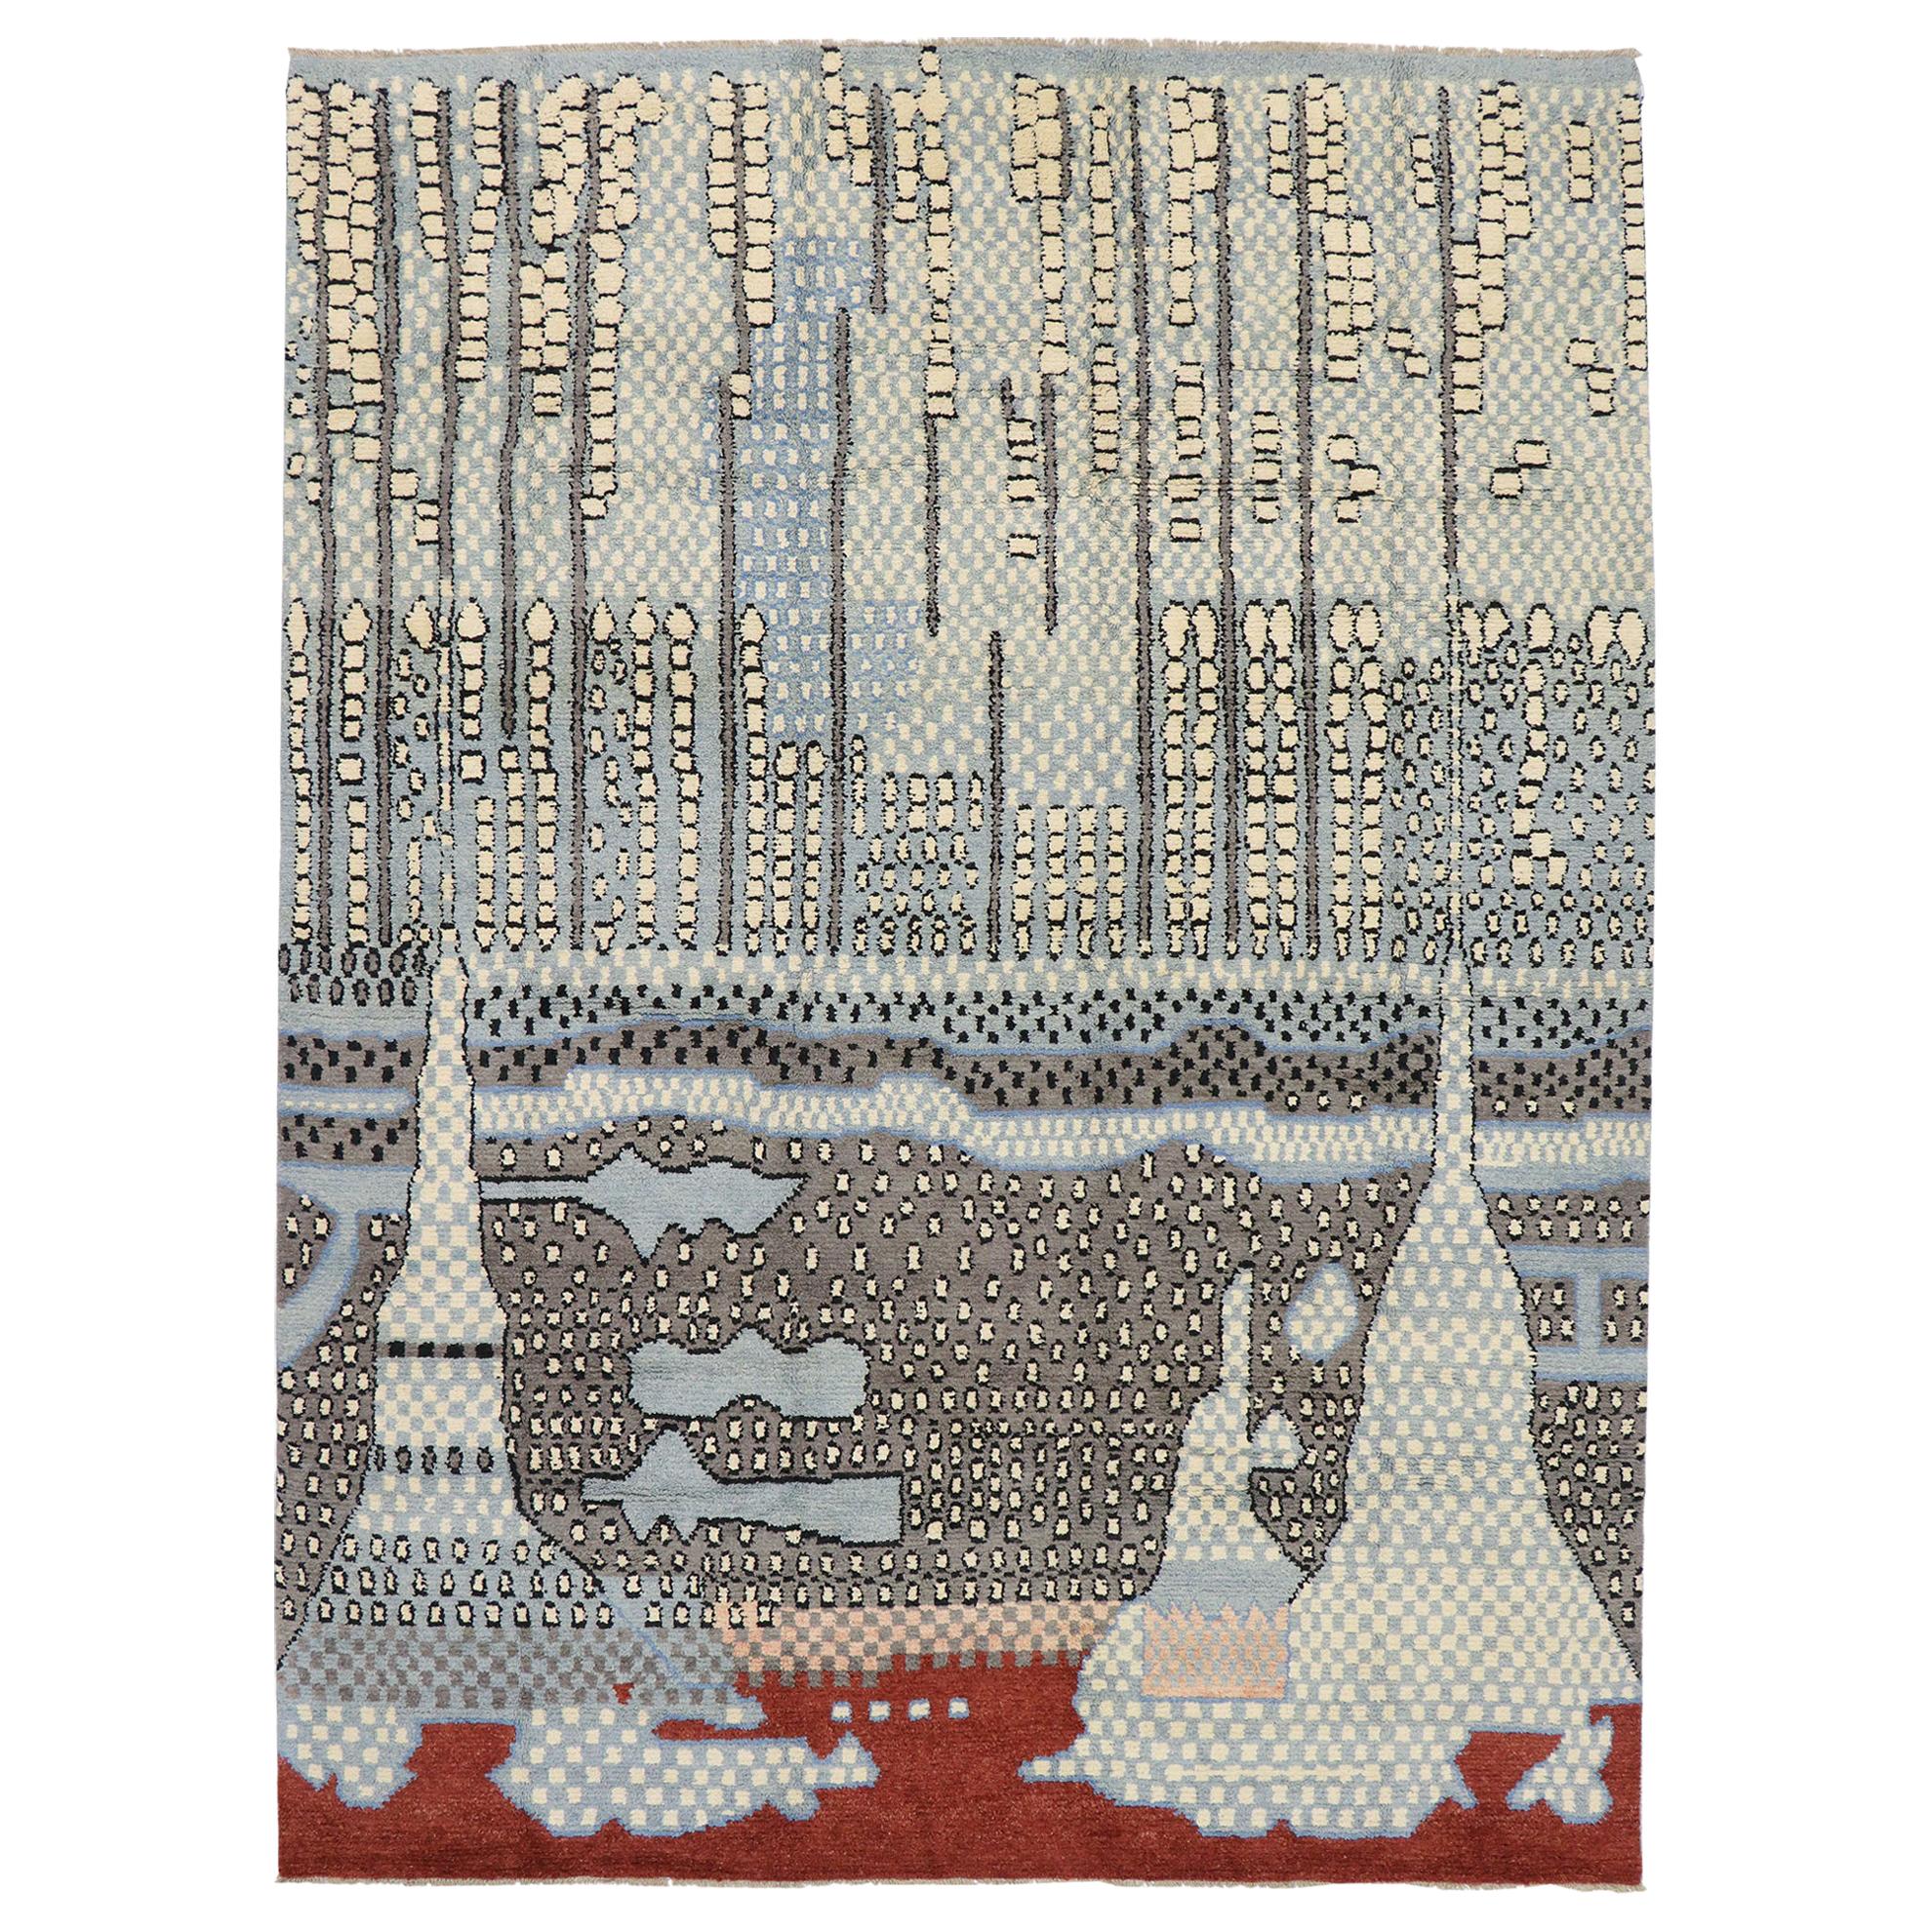 New Contemporary Moroccan Style Rug Inspired by Gunta Stolzl & Jasper Johns